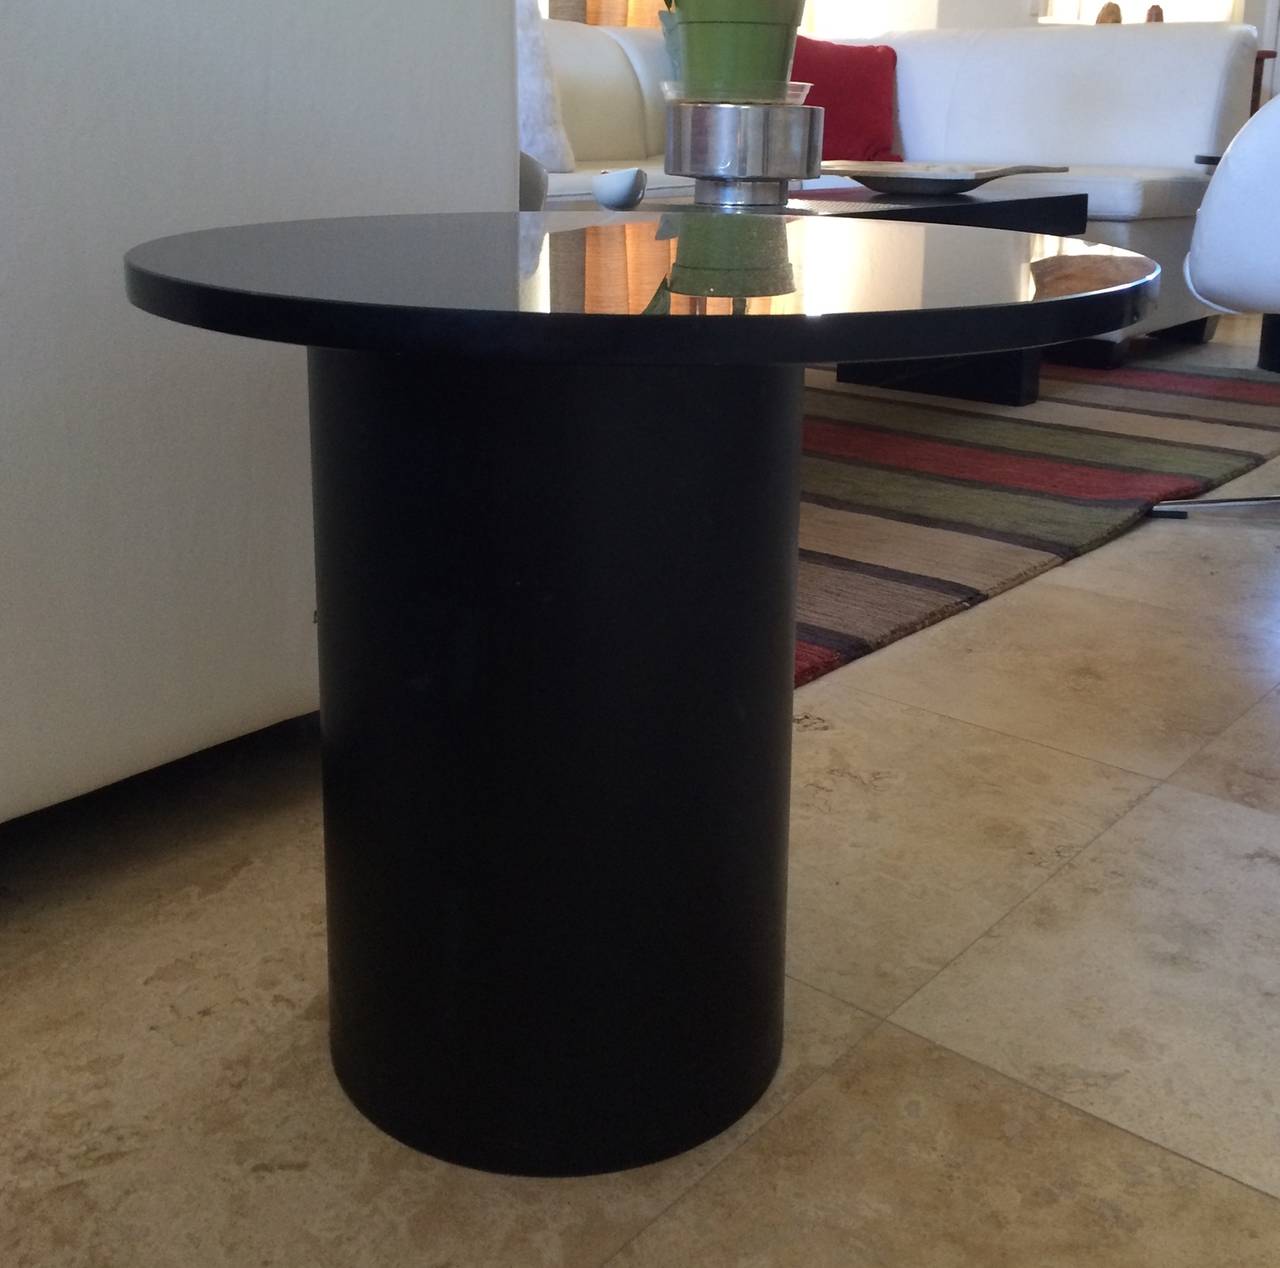 This stunning set of side tables are a must have for any interior.
The bases of the tables are extremely well made, they are solid steel with a chrome ring on the top, each pedestal weights about 50 pounds, the to is 1